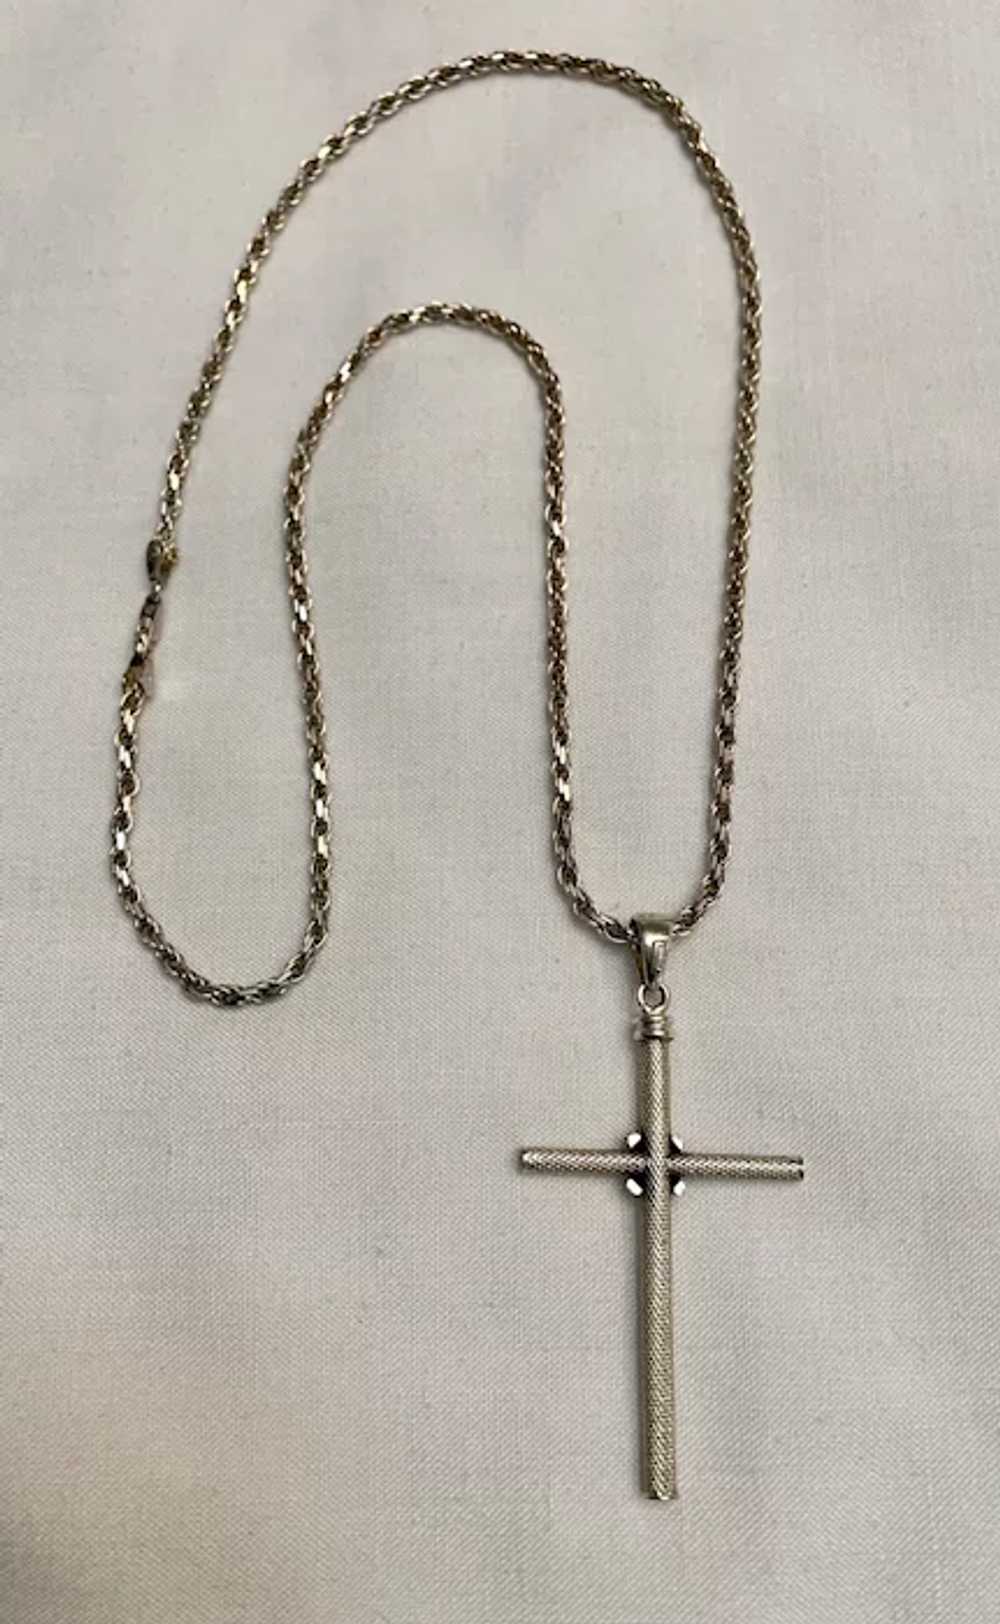 Stunning Sterling Silver Cross with Sterling Chain - image 5